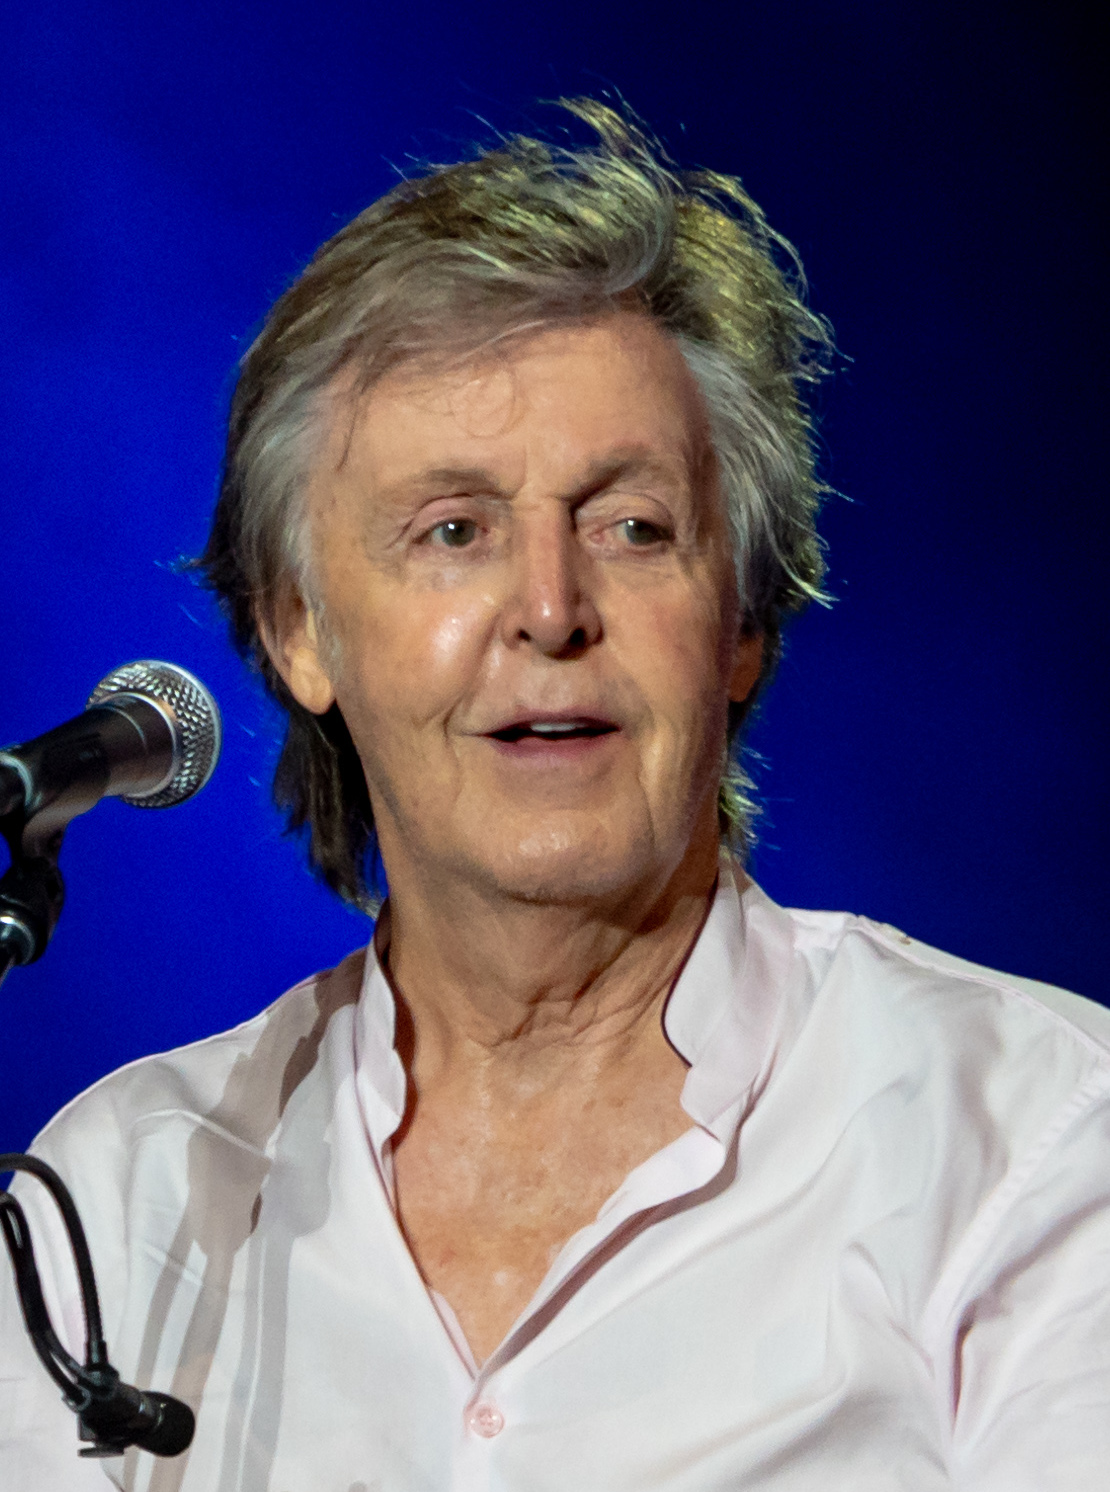 Someone’s knocking at the door! Let ‘em in – it’s Paul McCartney! | ColumbusFreePress.com